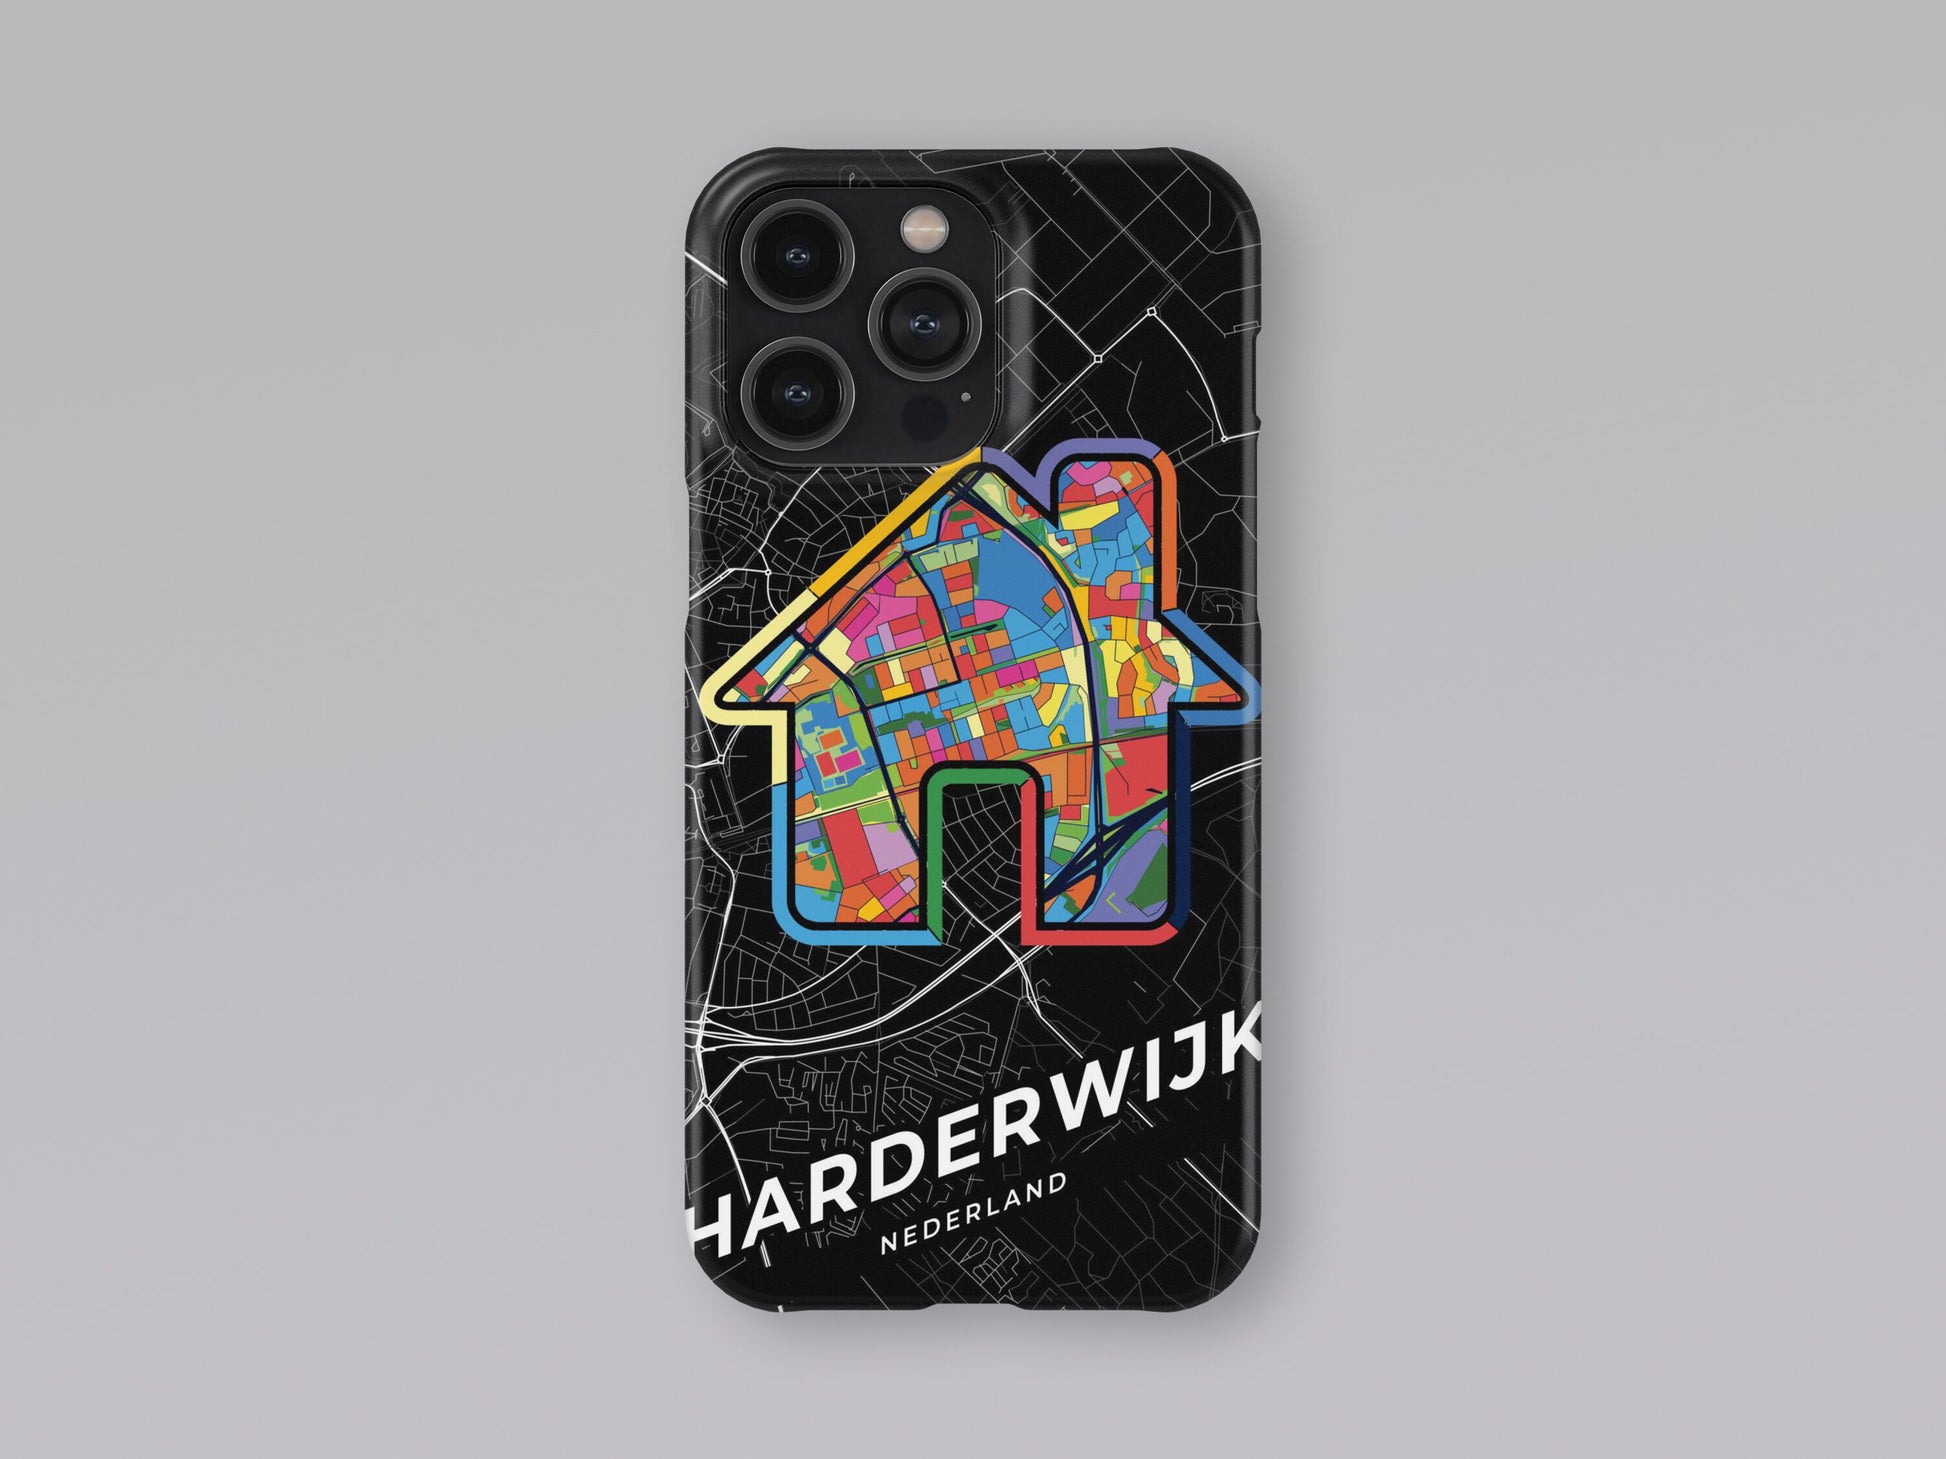 Harderwijk Netherlands slim phone case with colorful icon. Birthday, wedding or housewarming gift. Couple match cases. 3